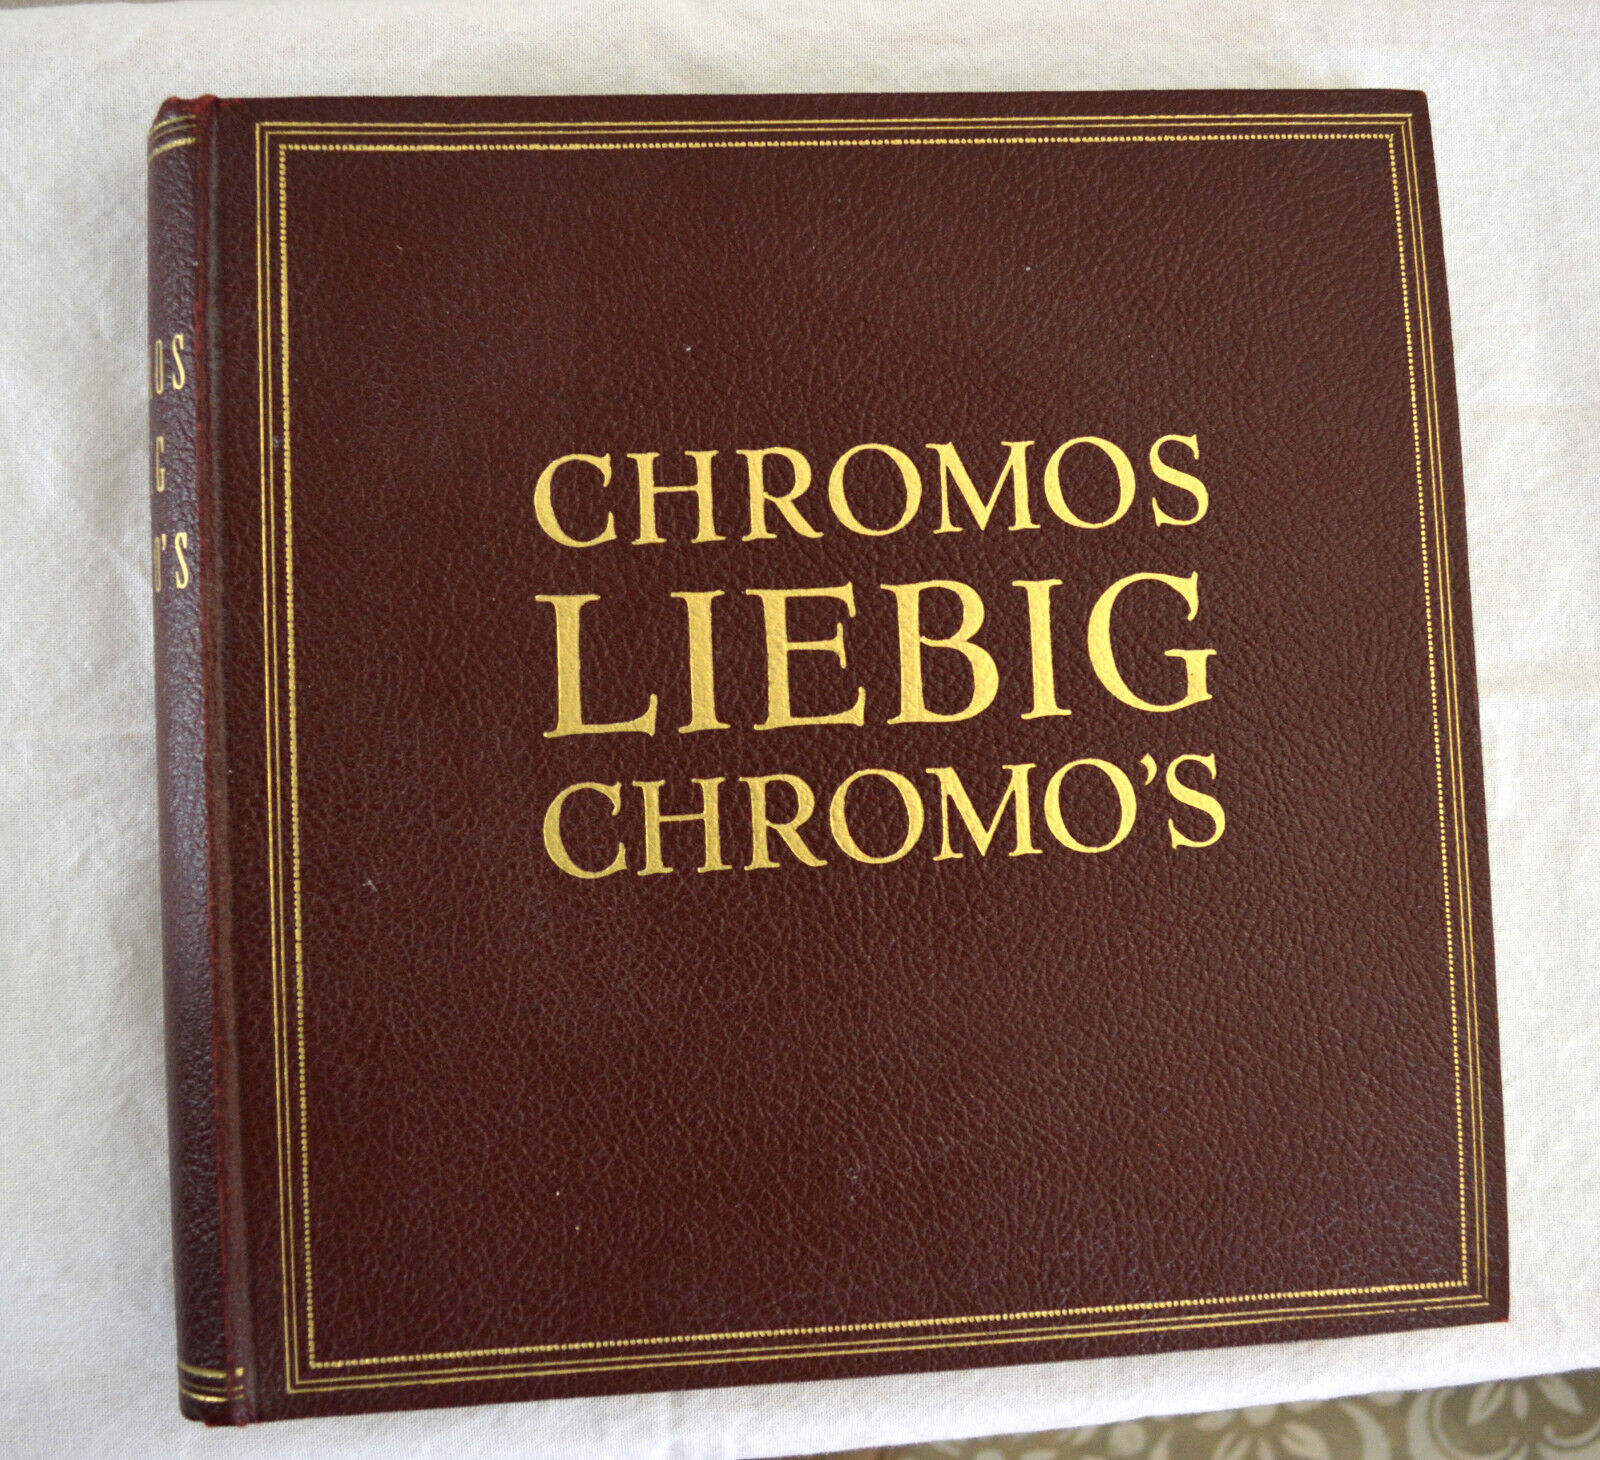 CHROMOS LIEBIG LITHOGRAPH ADVERTISING CARDS 50 BOUND COLLECTIONS 300 CARDS 19TH